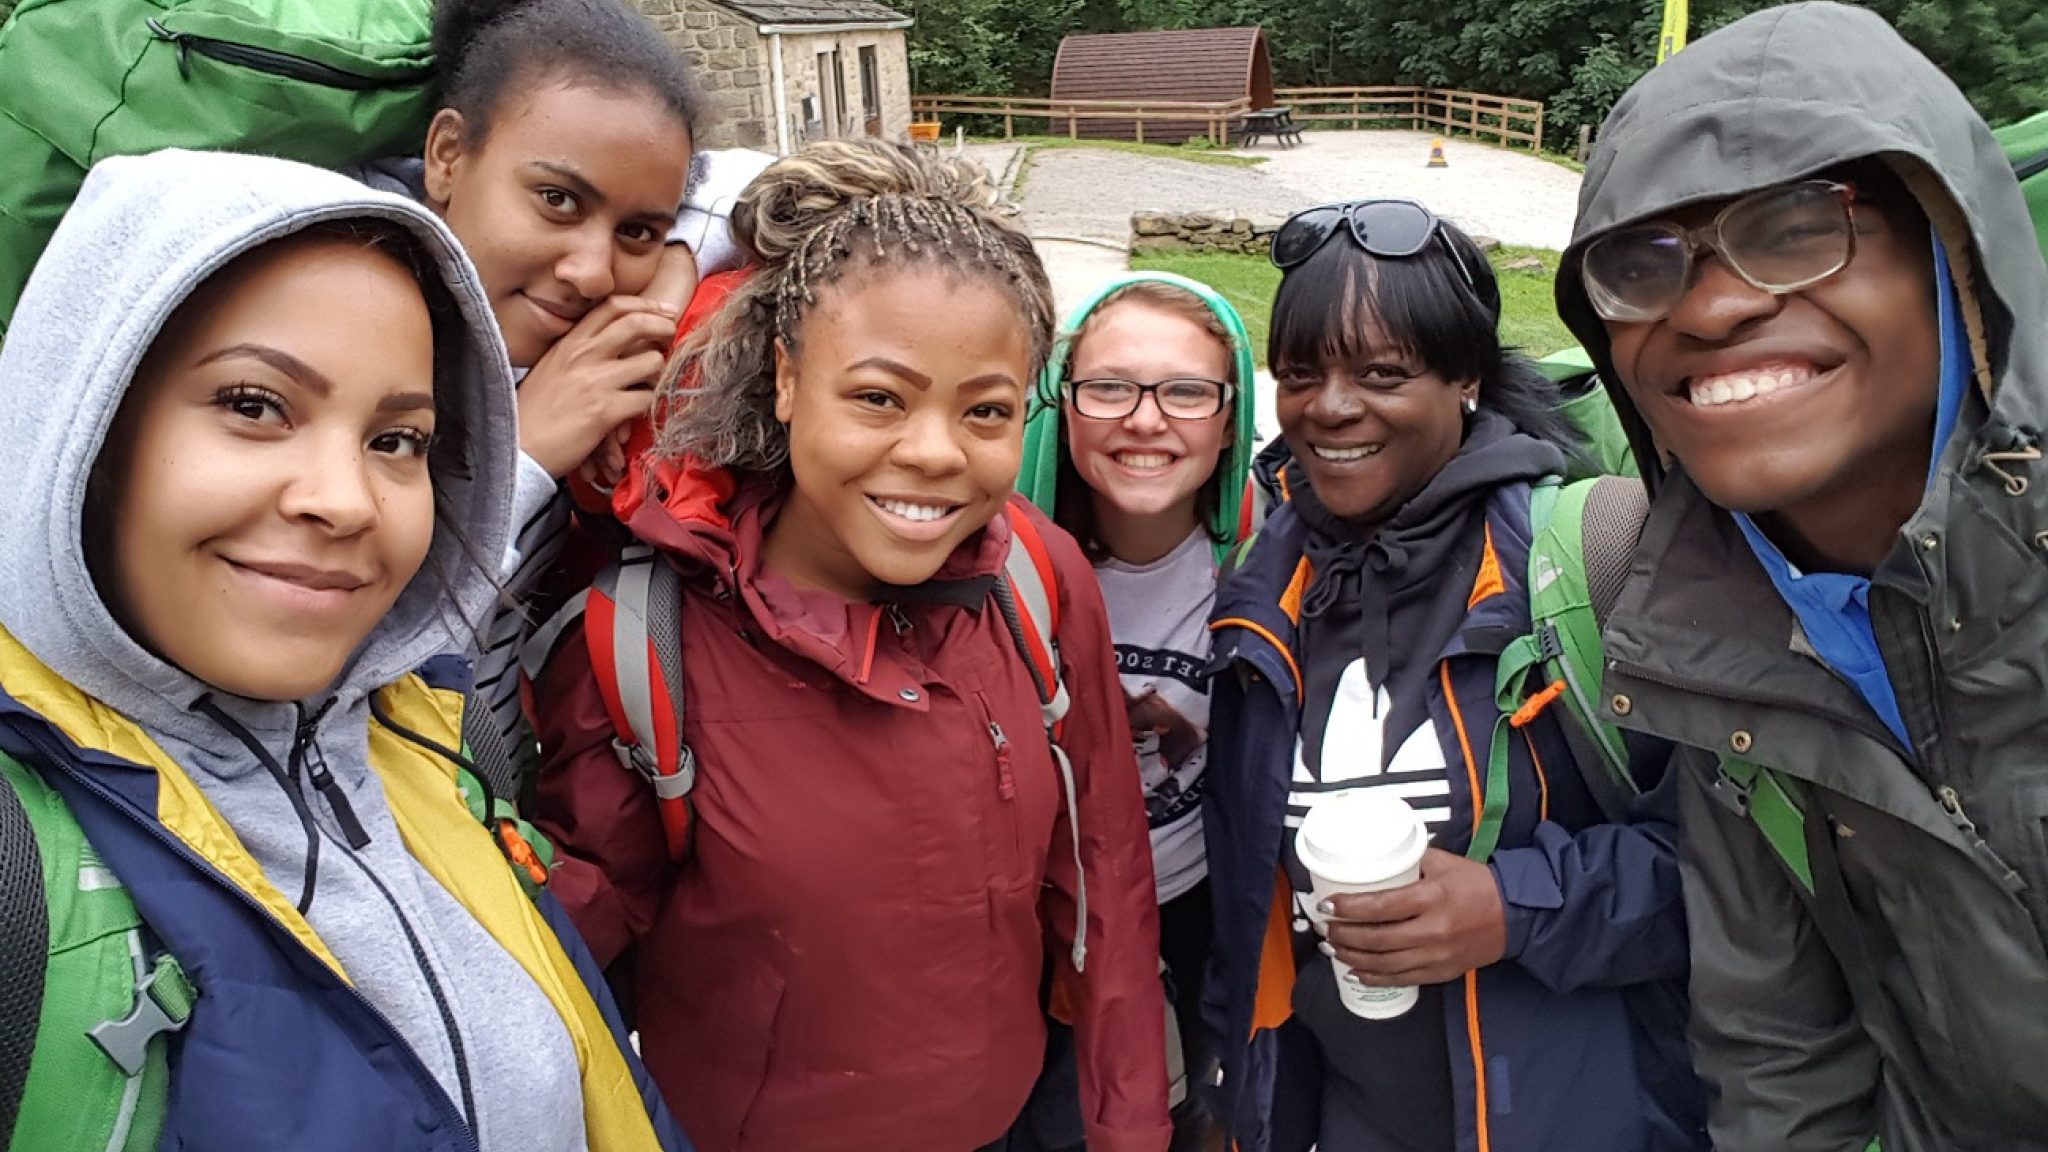 Six smiling young people taking part in the Duke of Edinburgh Awards Scheme. They are outside, wearing wet weather clothing and carrying rucksacks.